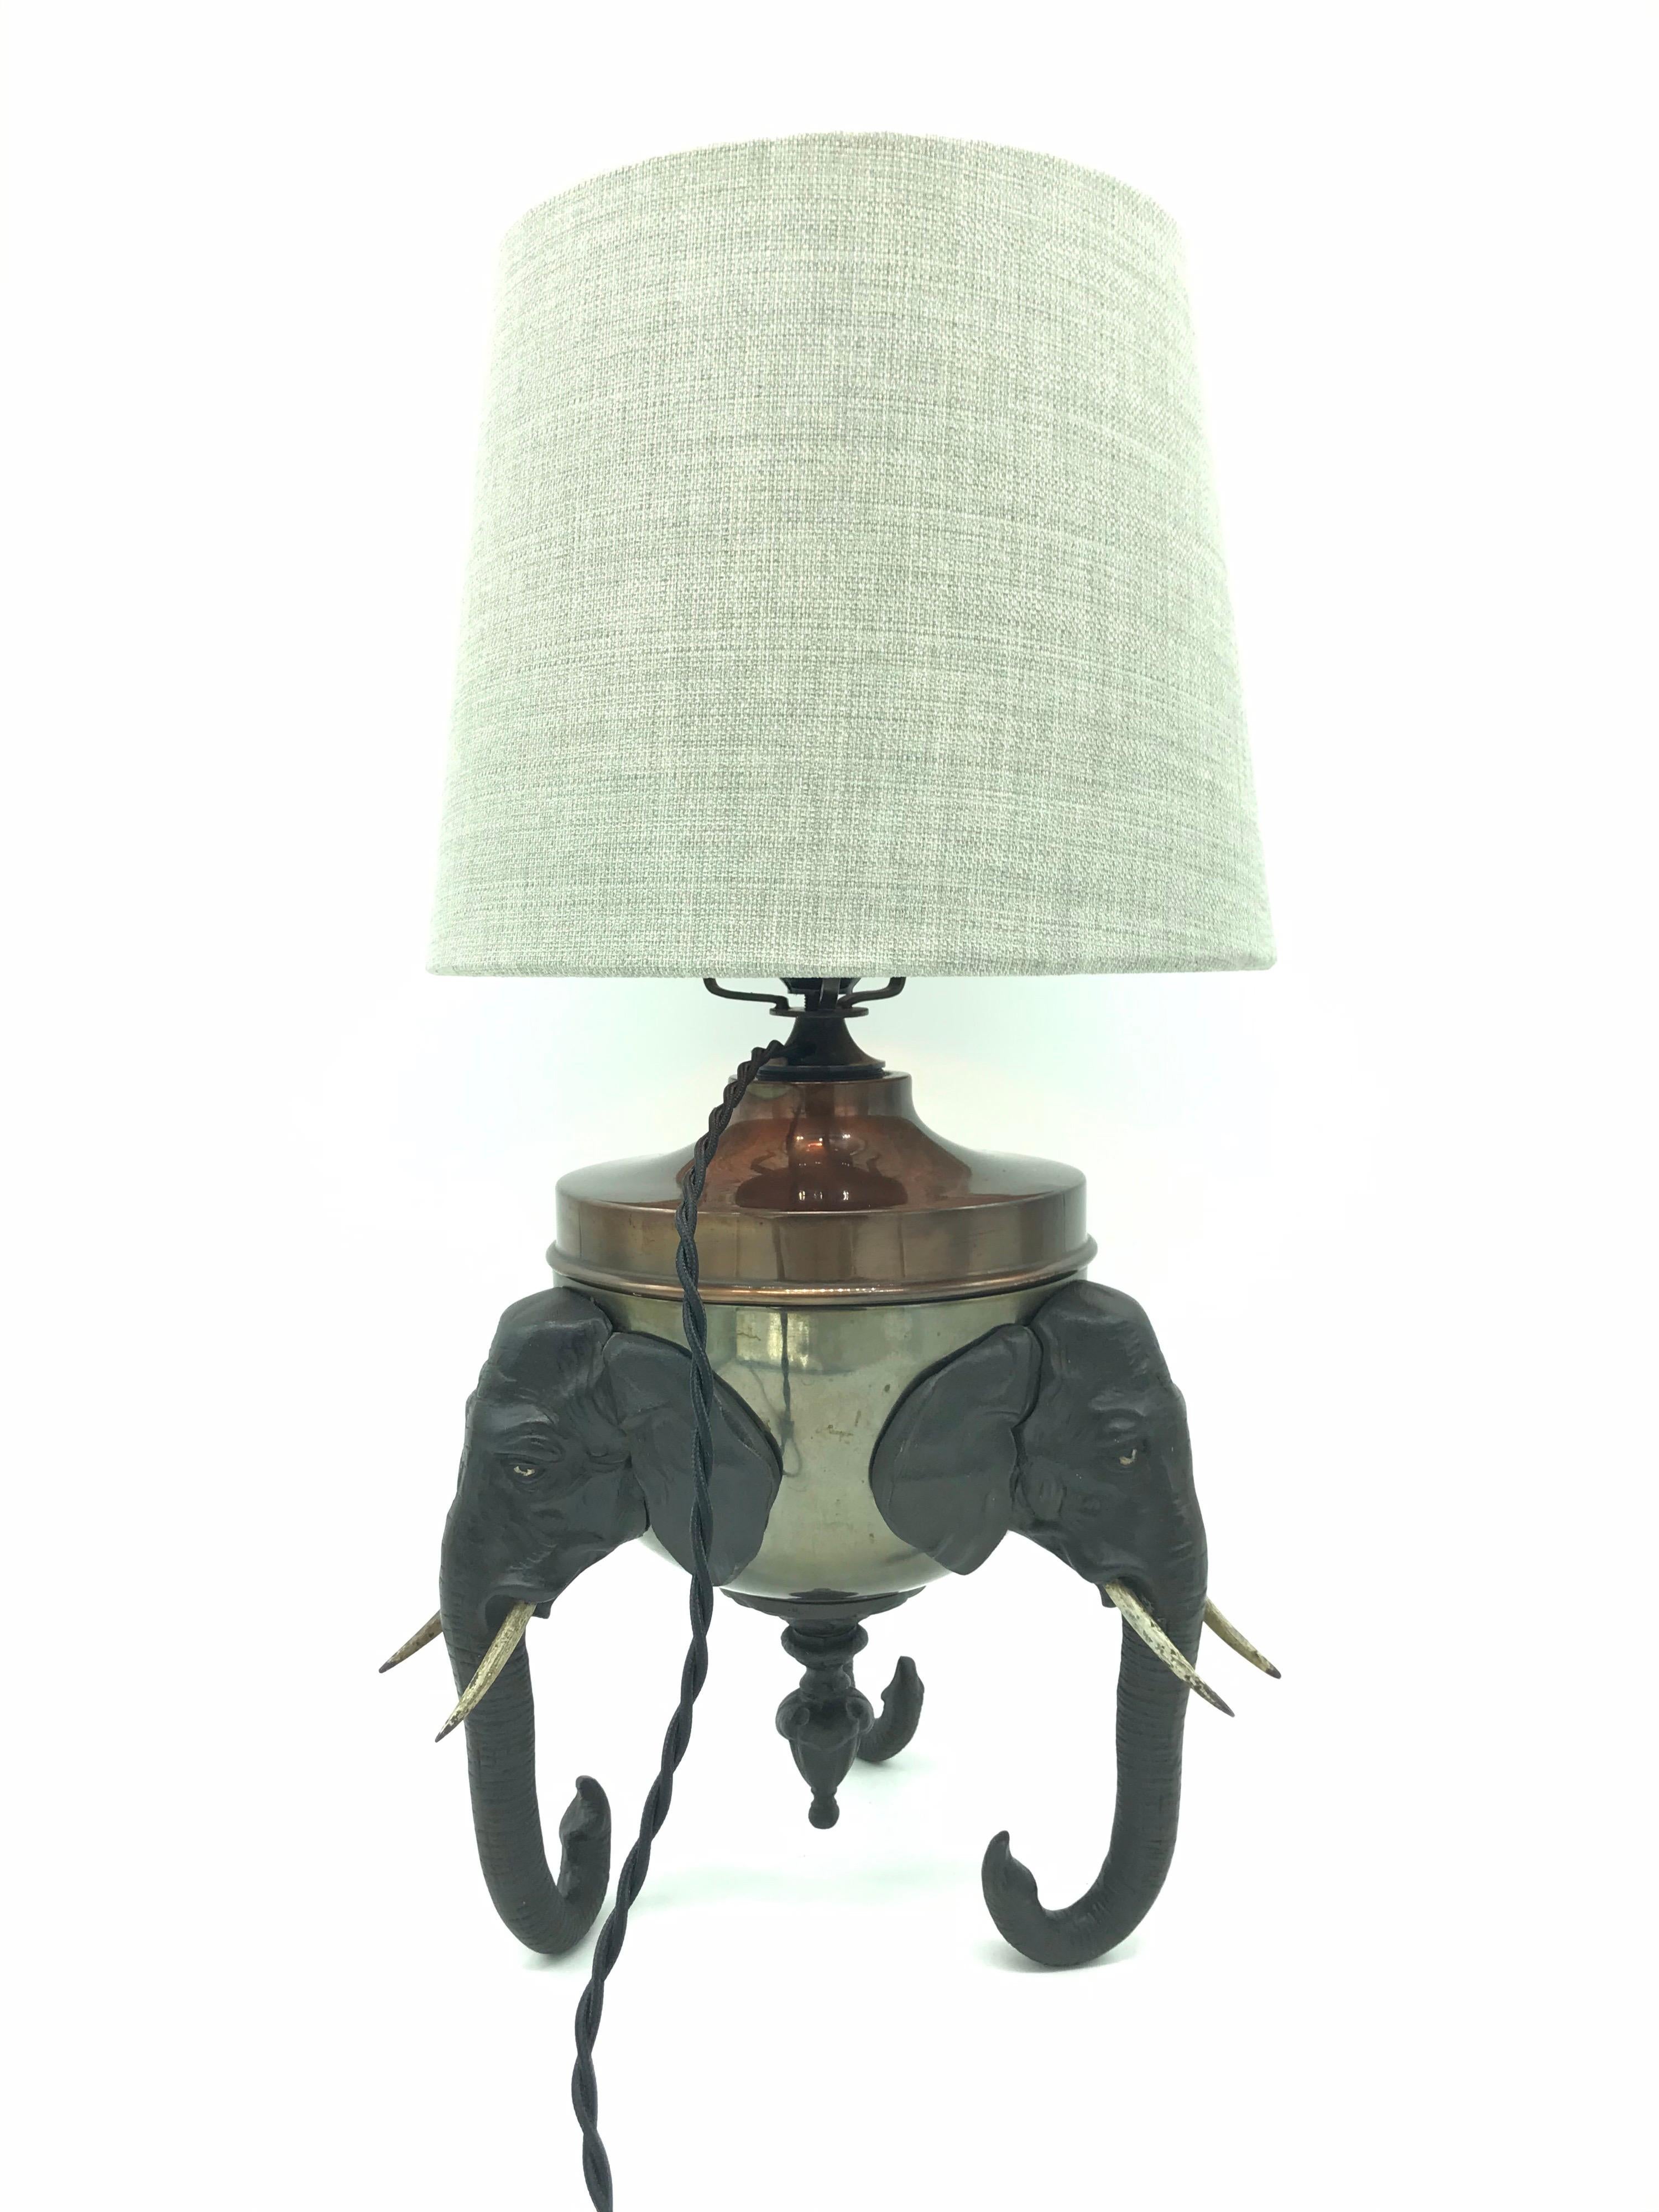 Extremely rare antique elephant oil lamp conversion to a table lamp.
Made of brass and cast iron 
3 elephant heads supporting the lamp on their tusks.
A great English country house look.
Rewired with an antique inline switch.
Can be fitted with an